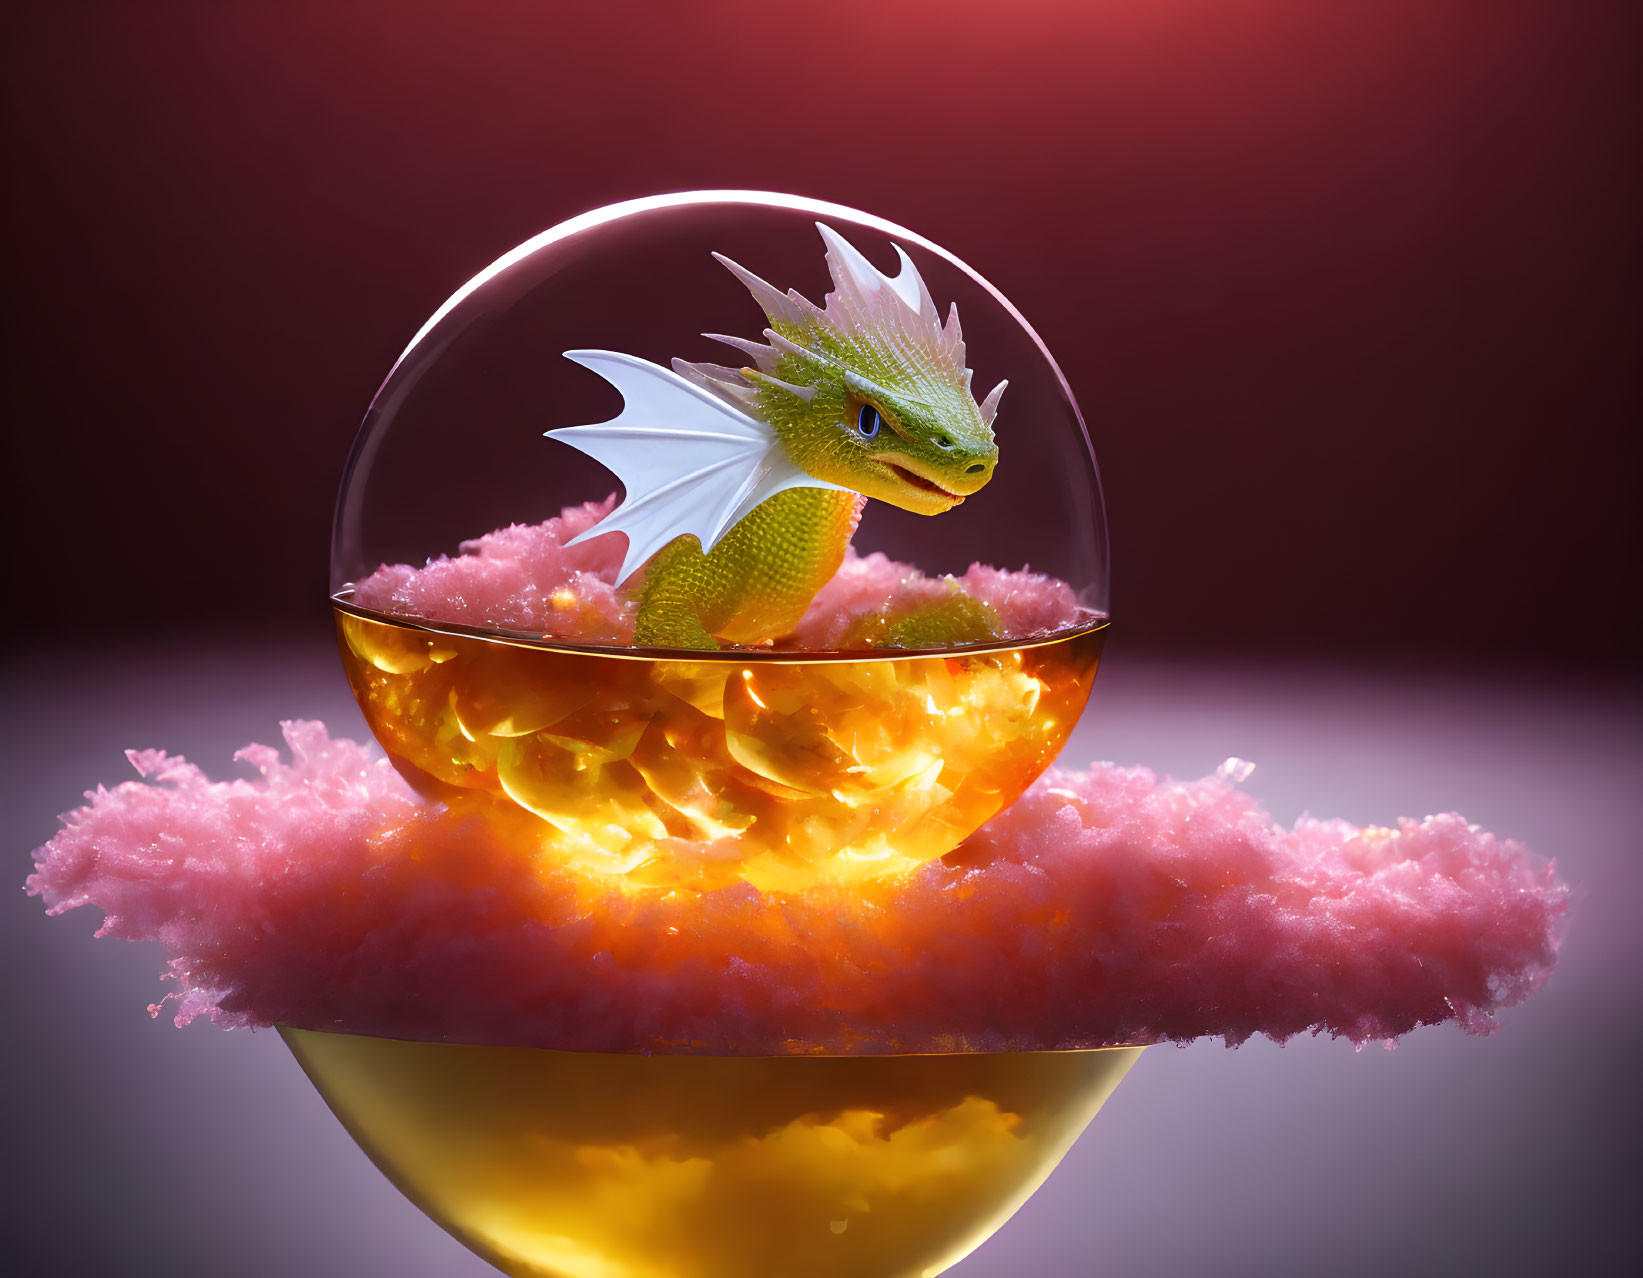 Green Dragon Hatchling in Transparent Sphere on Pink Clouds with Golden Glow on Red Background